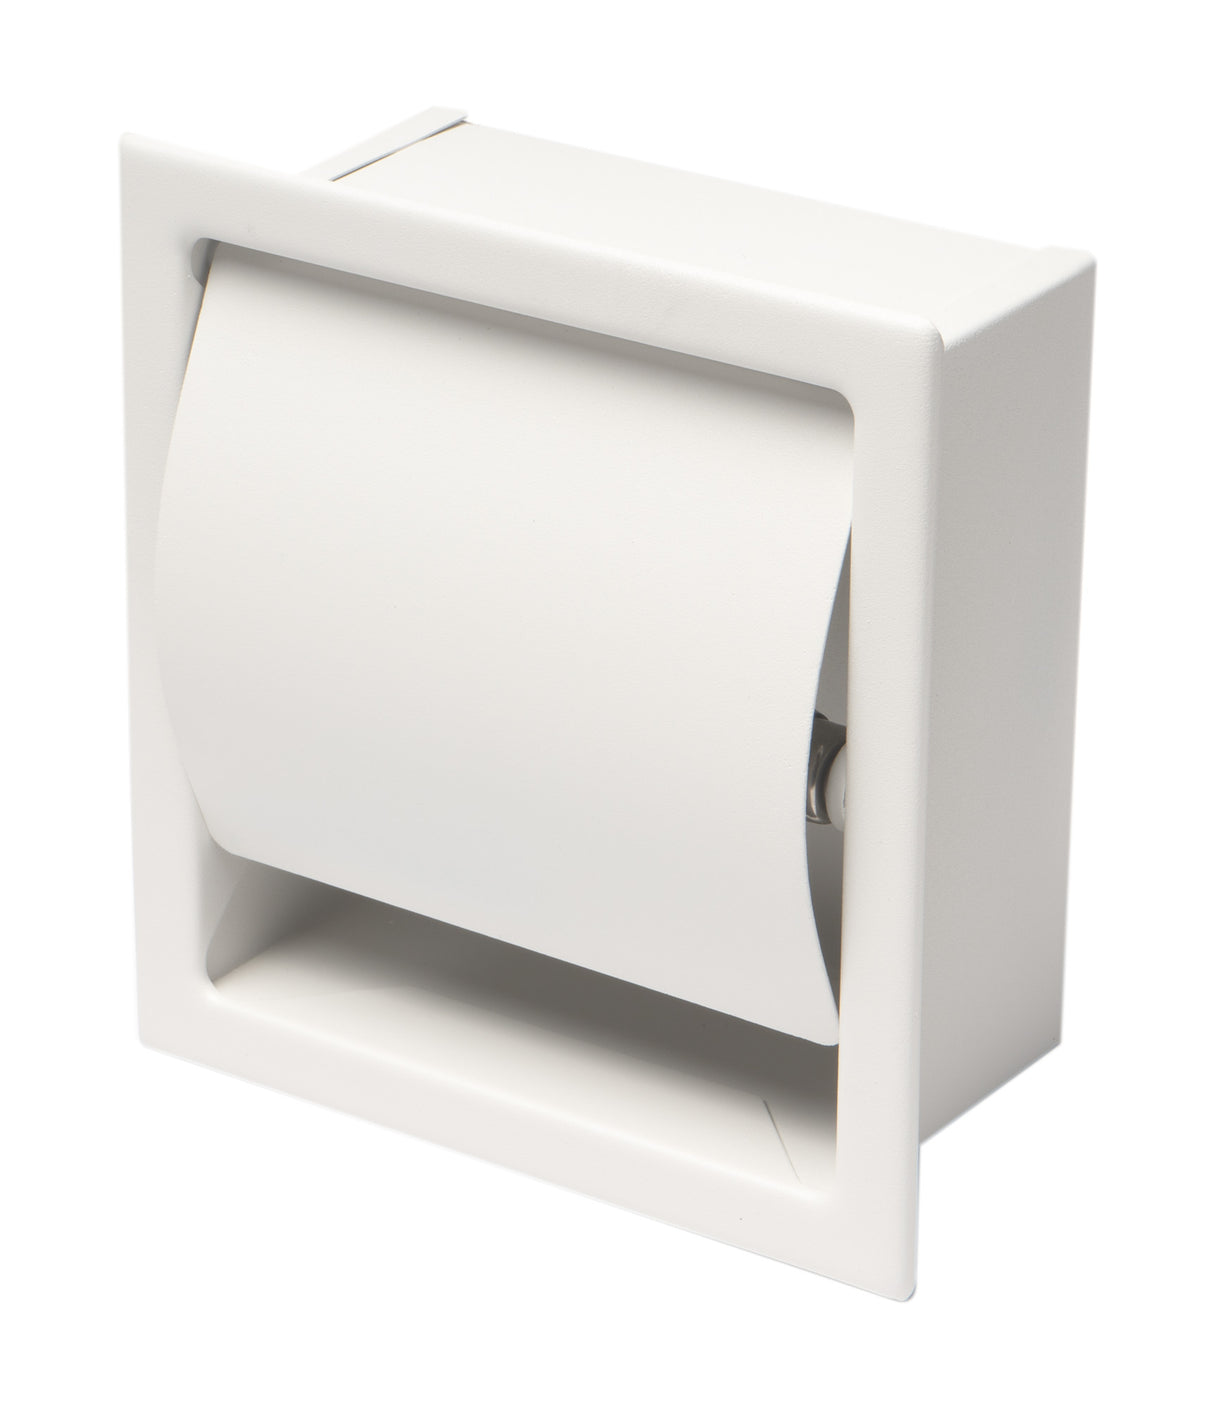 ALFI brand ABTPC77-W White Matte Stainless Steel Recessed Toilet Paper Holder with Cover